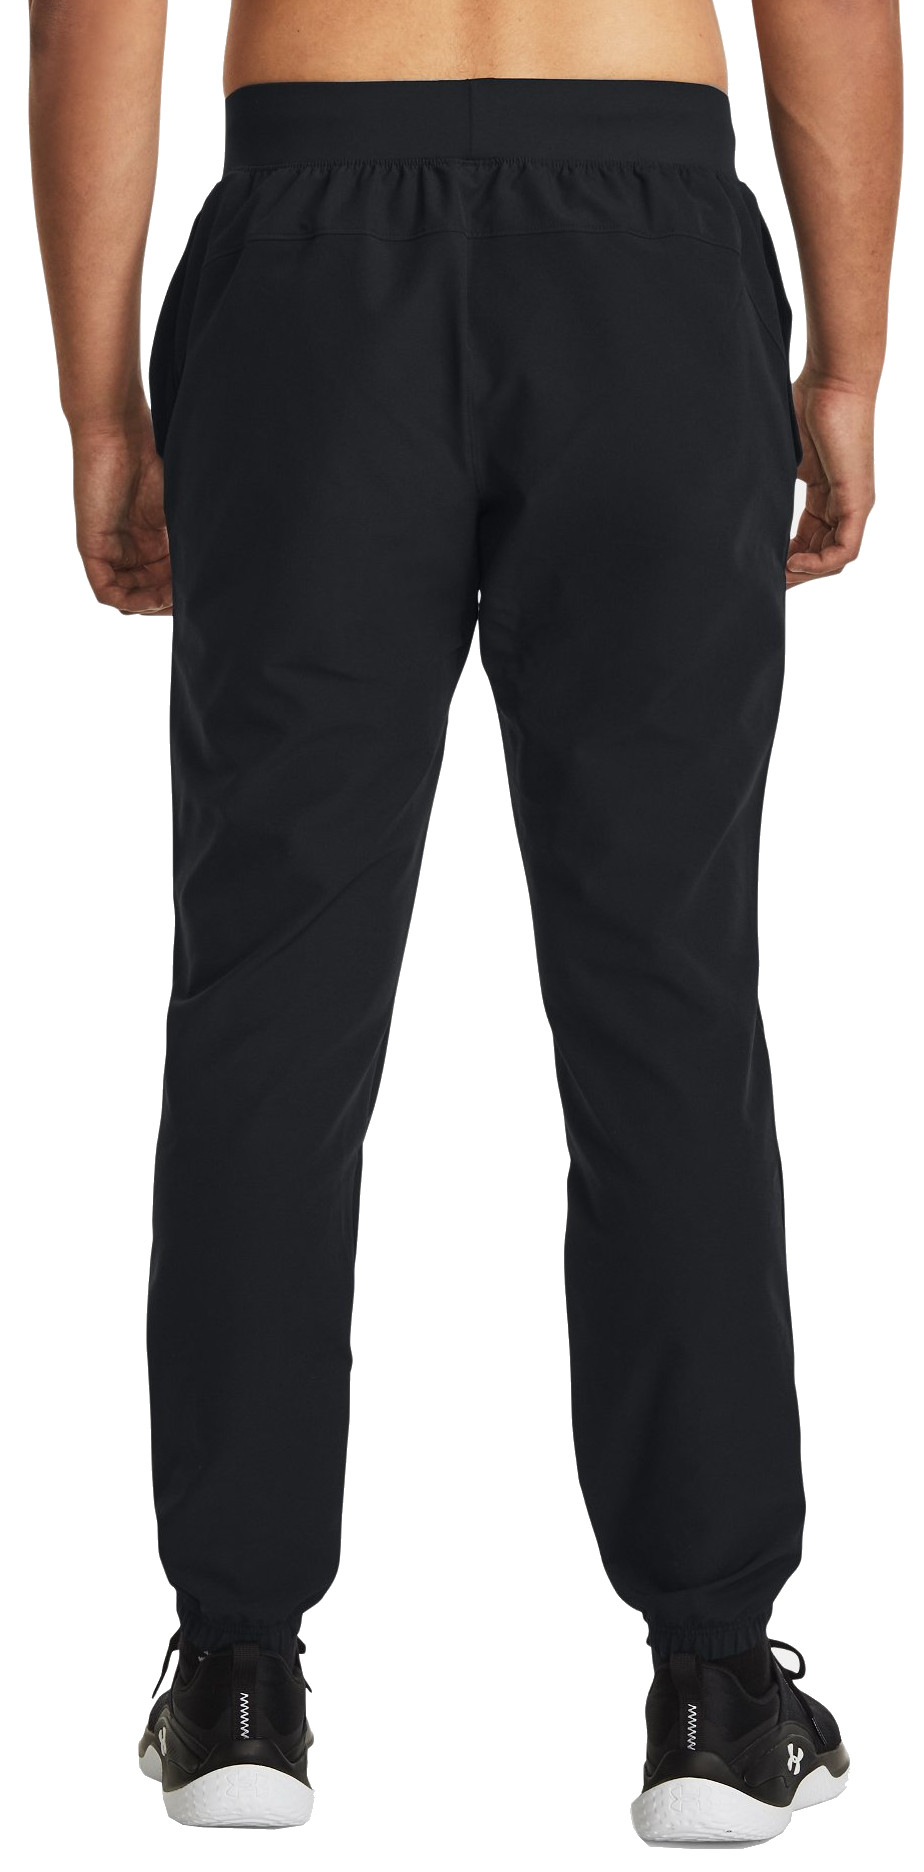 Under Armor Stretch Woven Cold Weather Pants - Green - 1379683-390